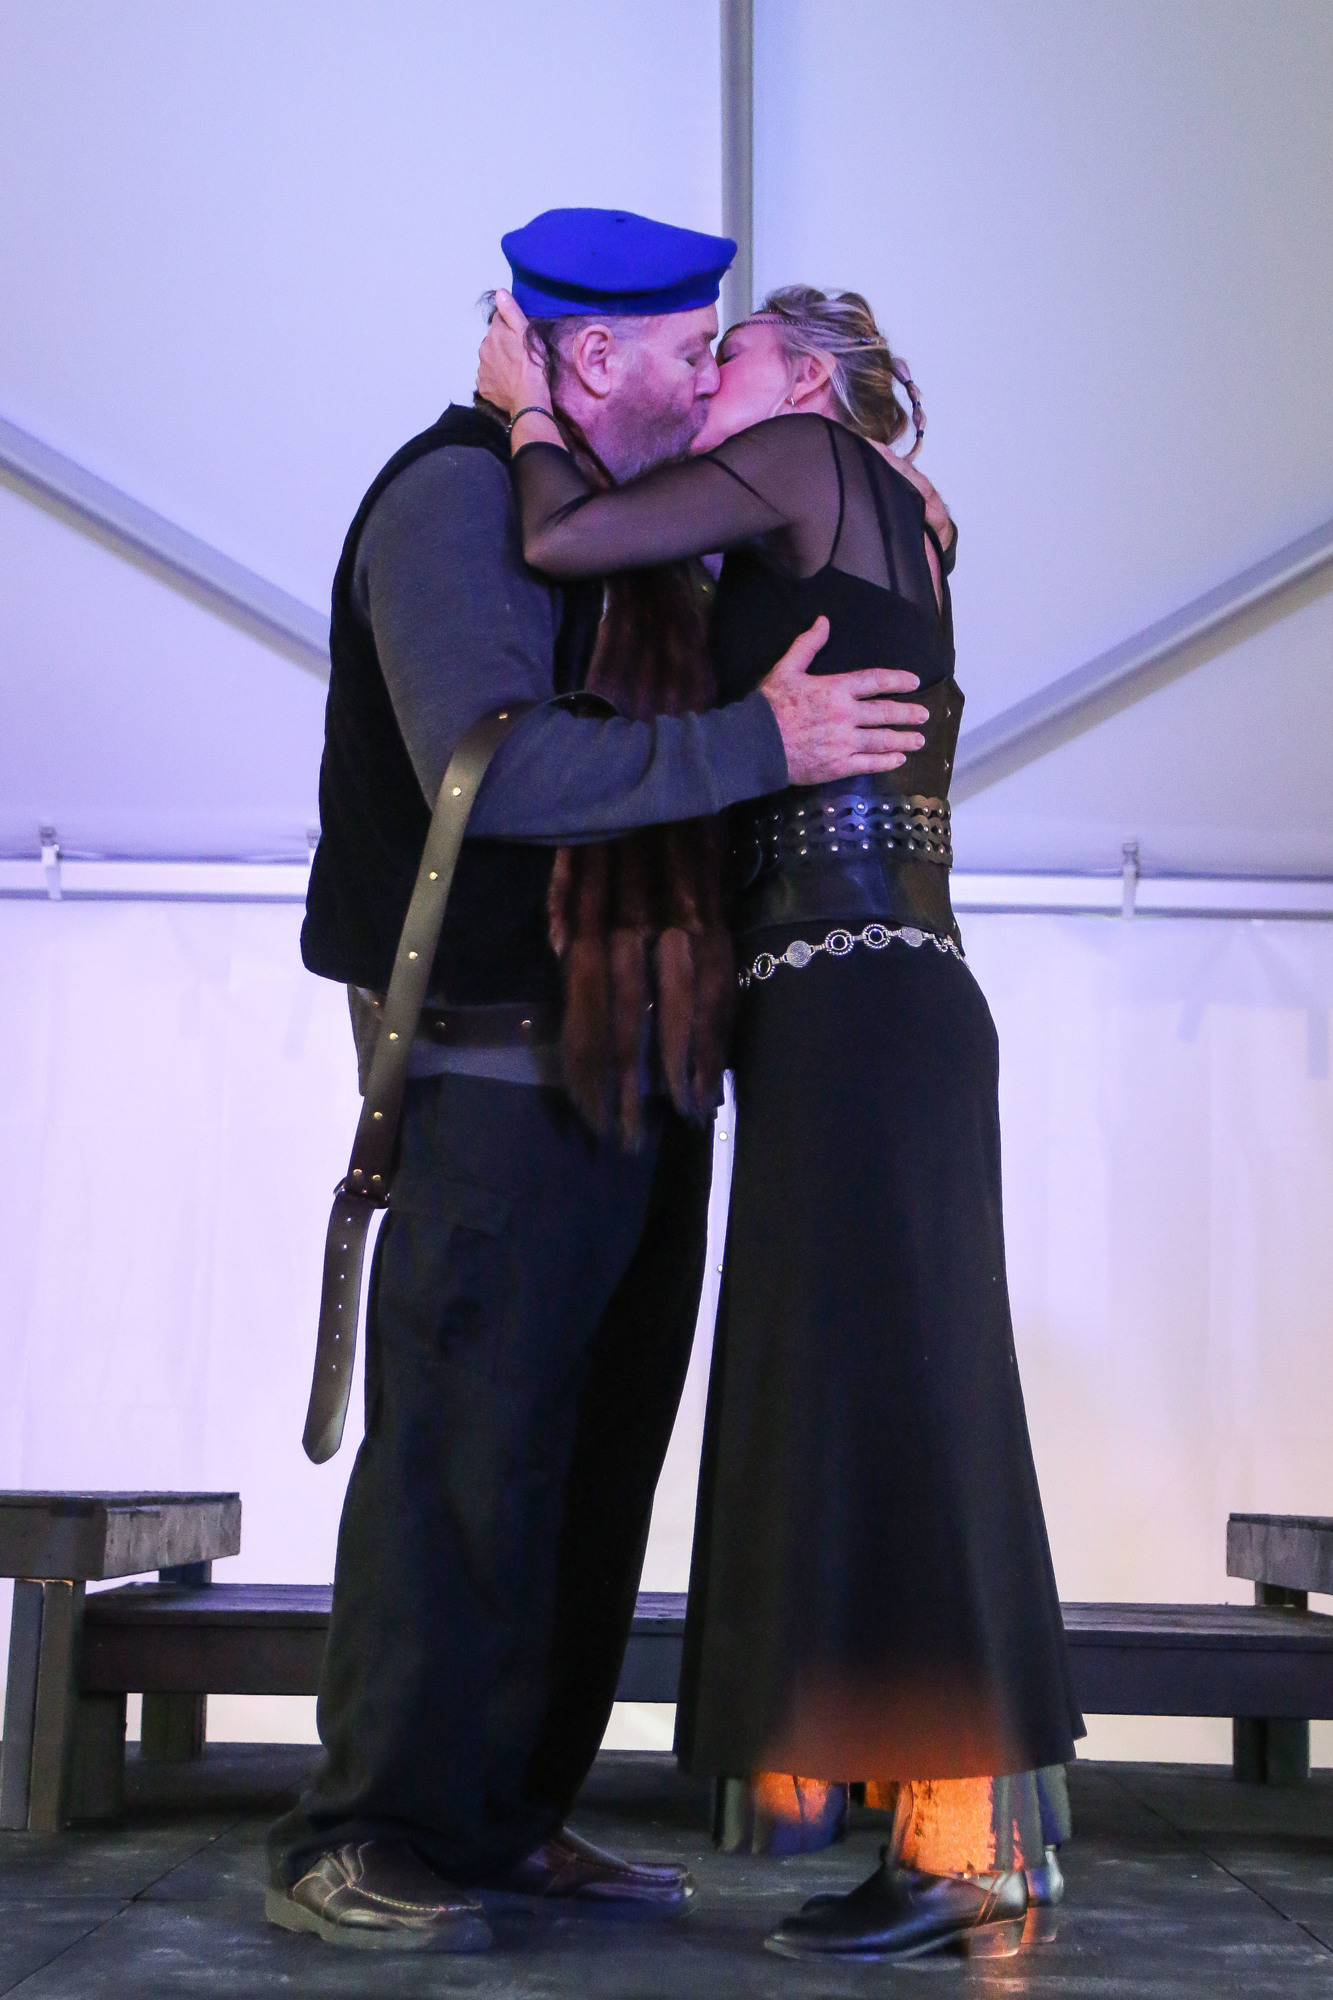 Robert O. Dimsey and Sharon Resnikoff share a passionate kiss on stage as Macbeth and Lady Macbeth. Photo by Paige Wilson